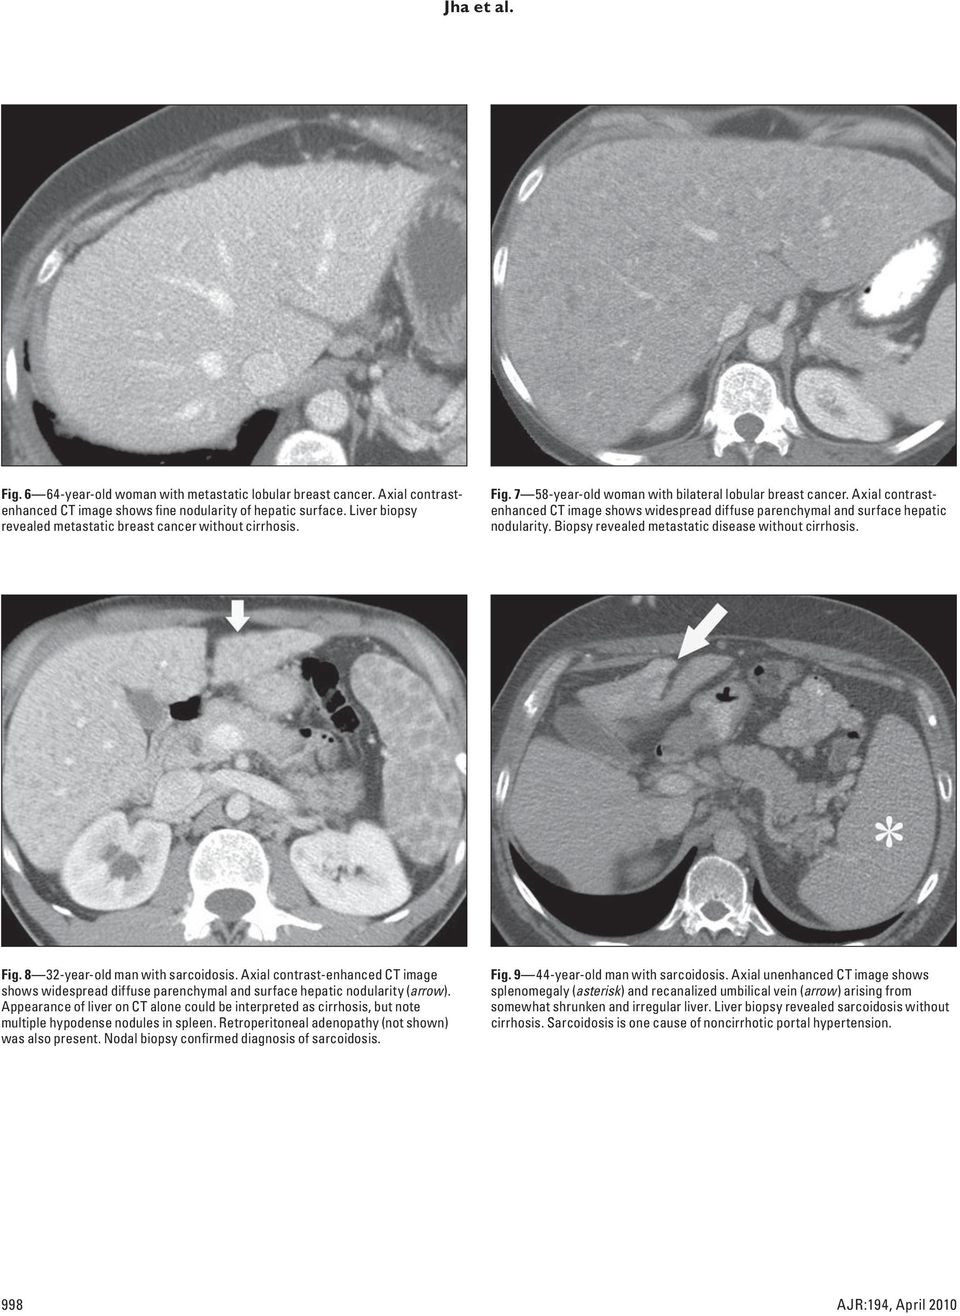 xial contrastenhanced CT image shows widespread diffuse parenchymal and surface hepatic nodularity. iopsy revealed metastatic disease without cirrhosis. Fig. 8 32-year-old man with sarcoidosis.